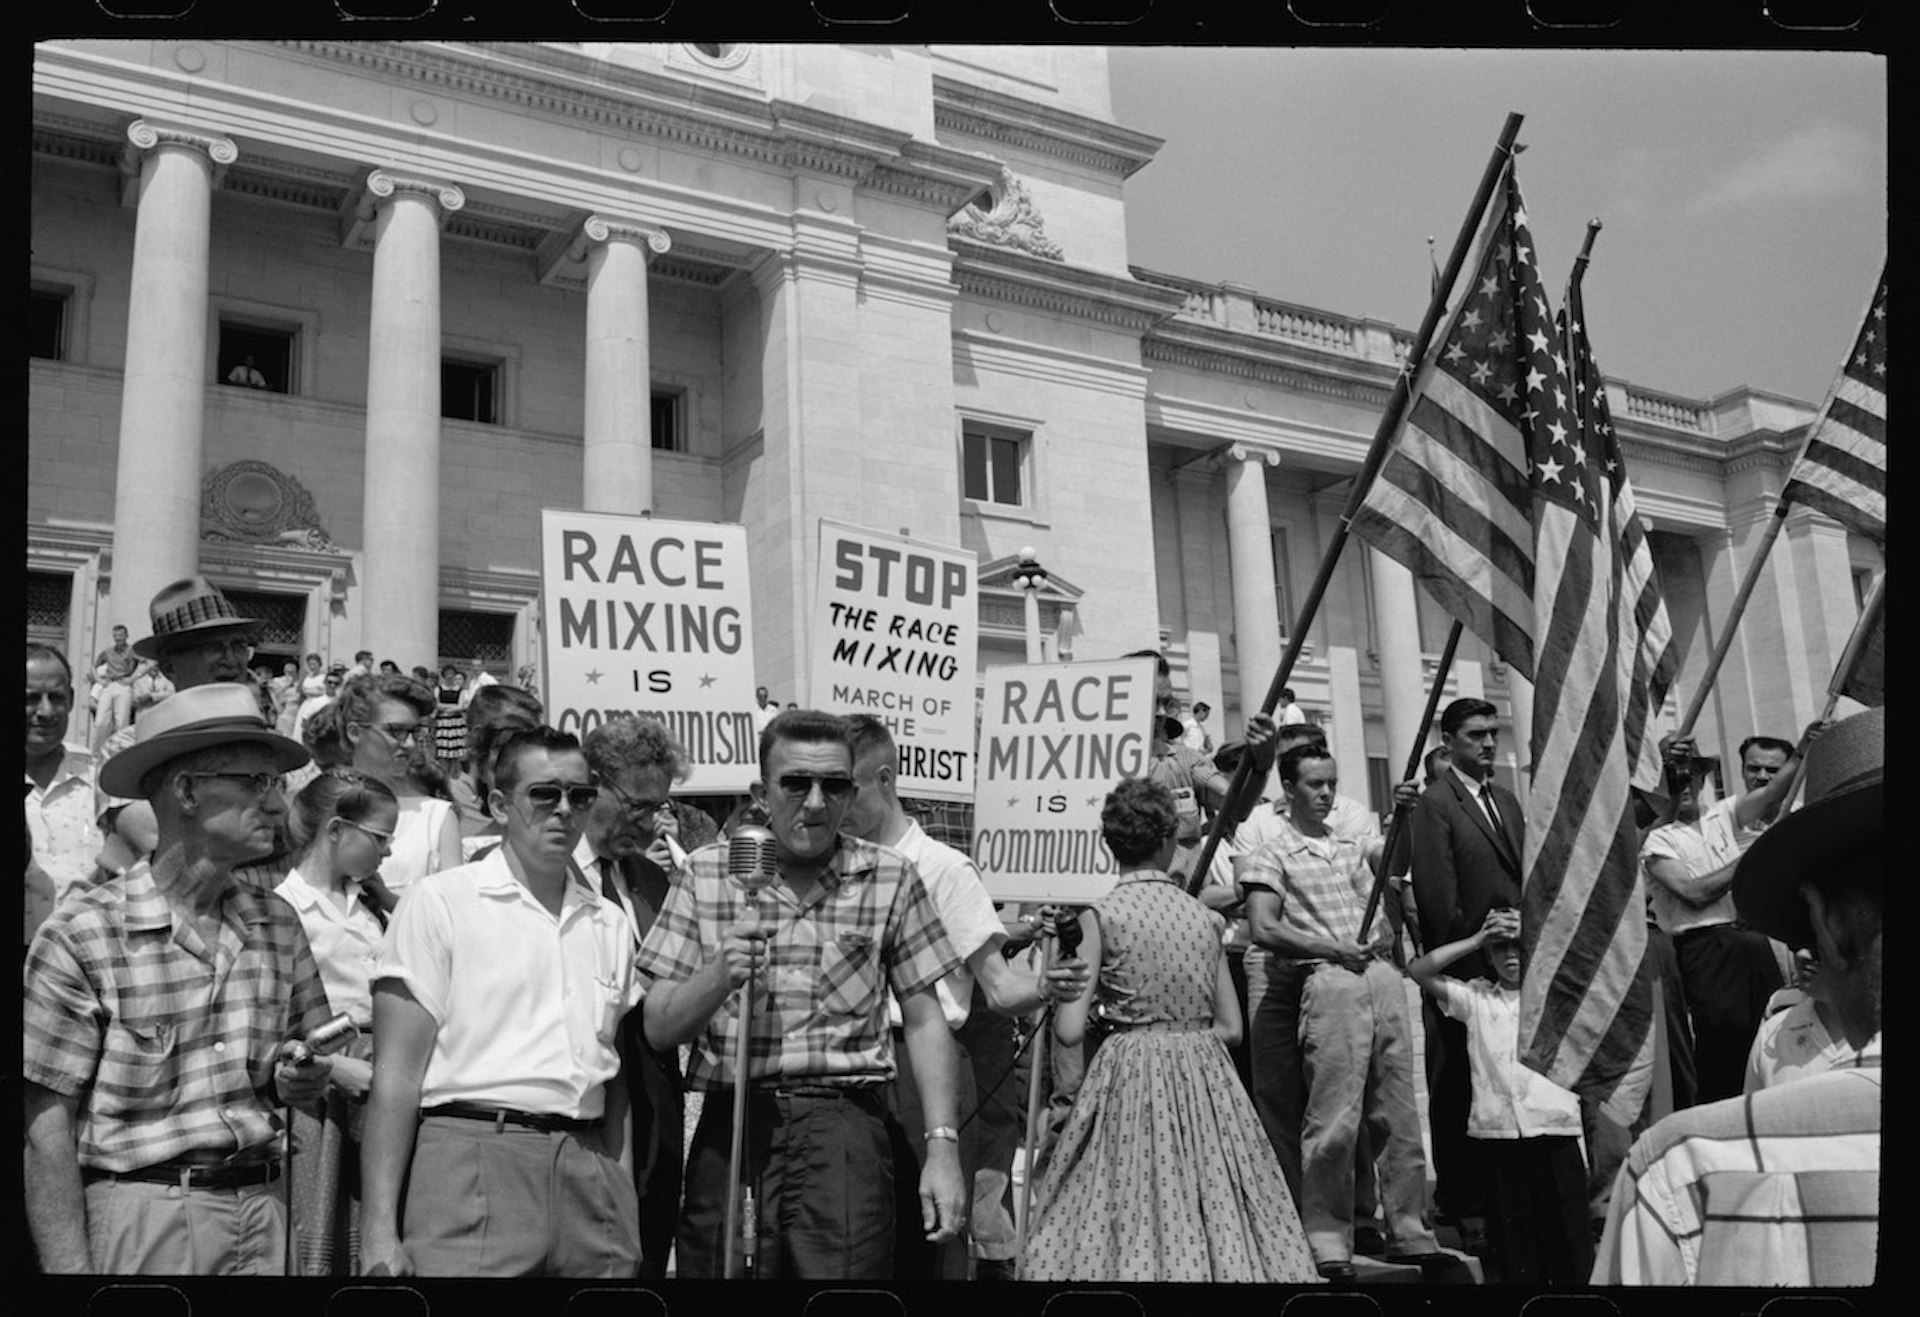 An anti-integration rally in Little Rock, Arkansas. Photo courtesy of Magnolia Pictures.